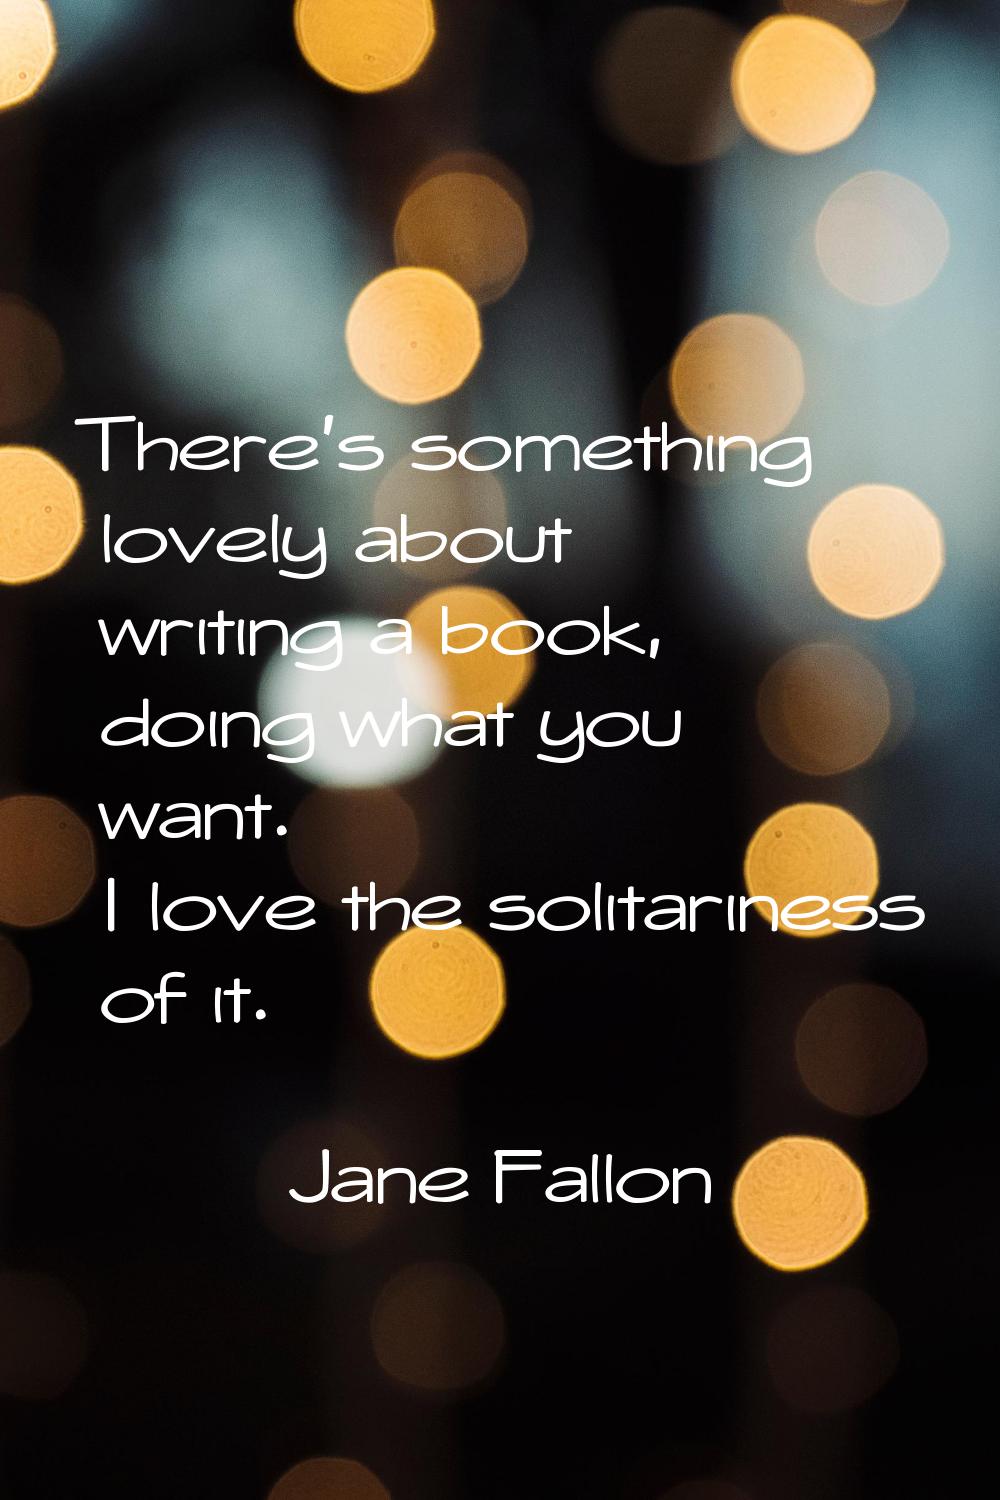 There's something lovely about writing a book, doing what you want. I love the solitariness of it.